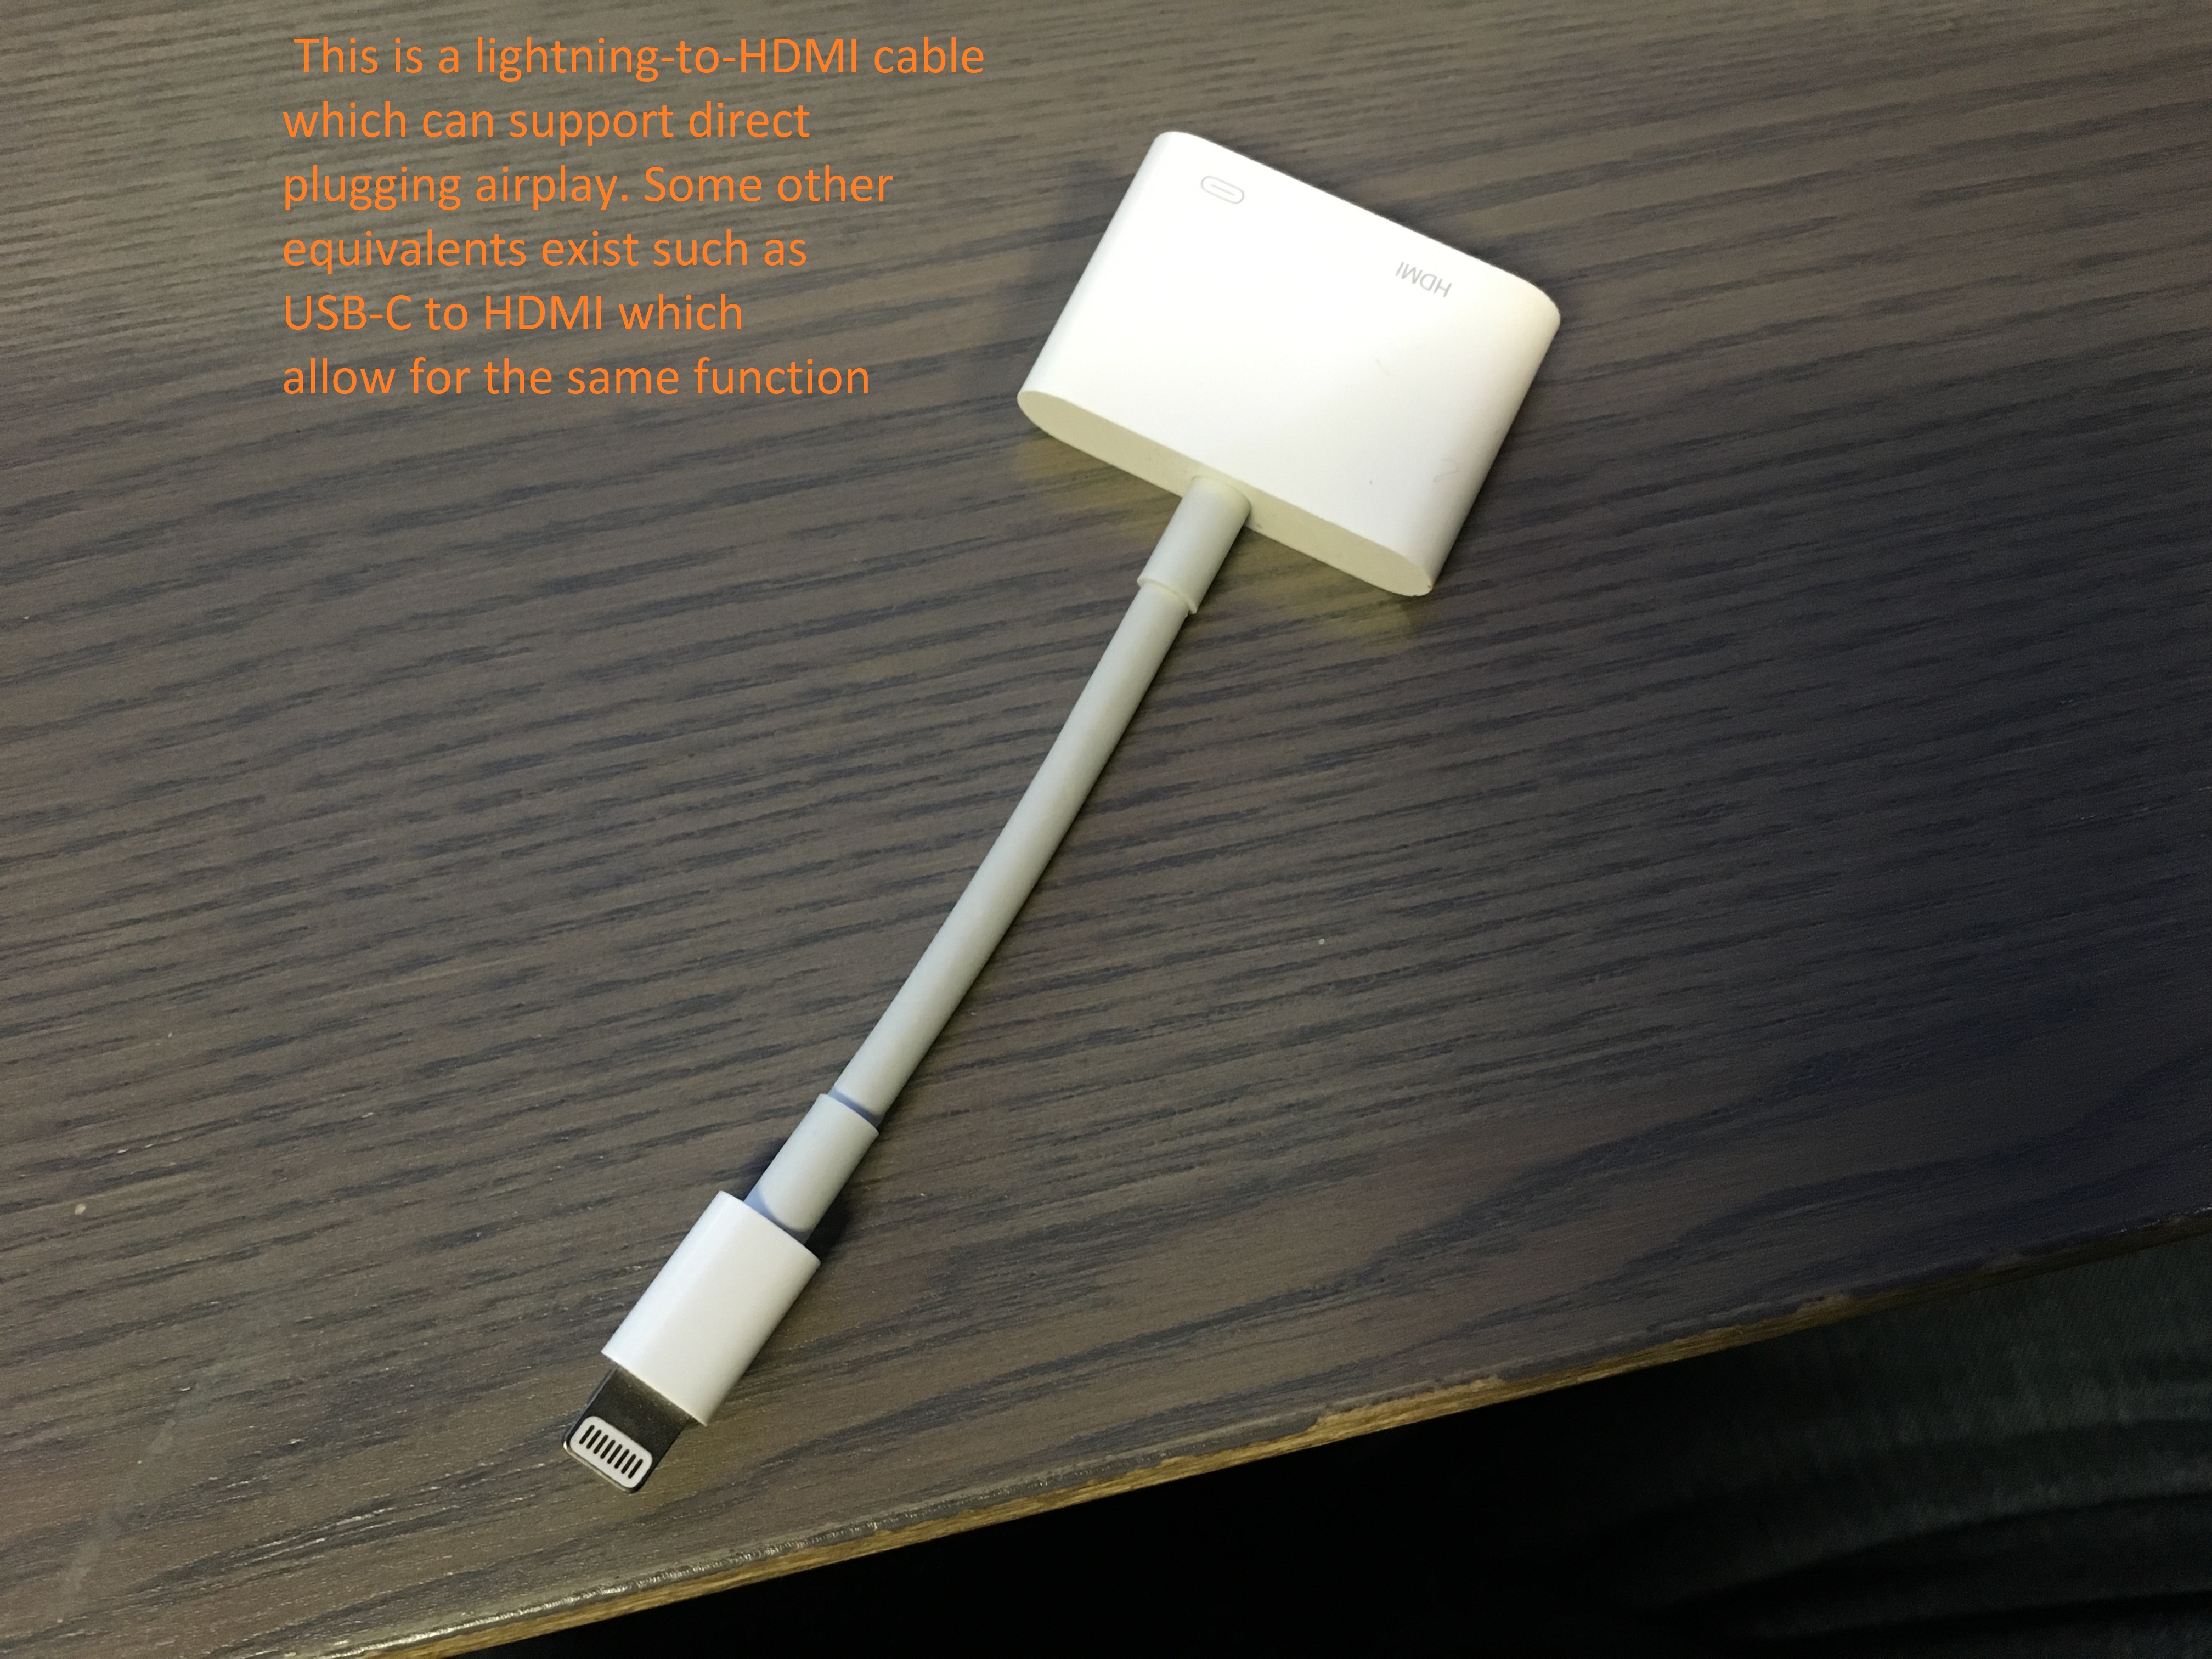 Lightning-to-HDMI cable adapter for direct airplay. Other adapters function the same with different devices.